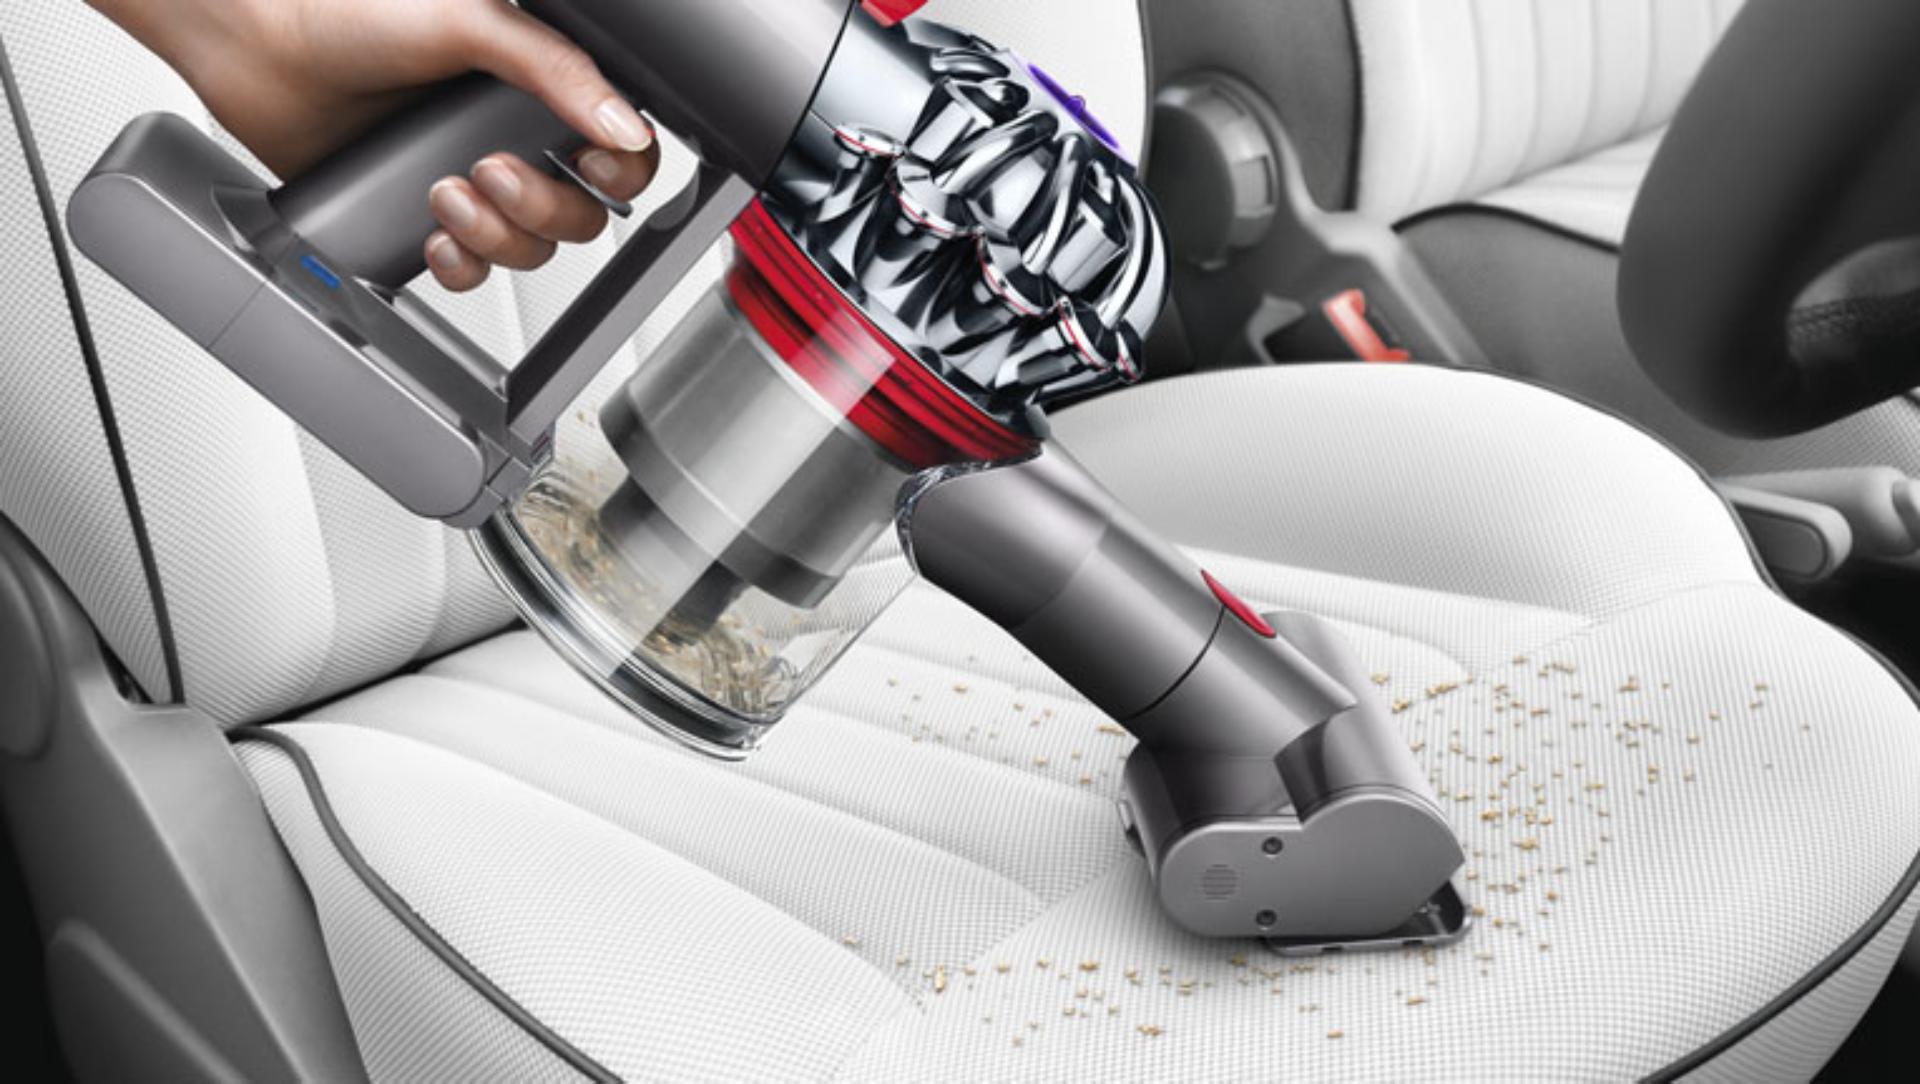 Dyson V8 Slim vacuum in handheld mode cleaning a car seat